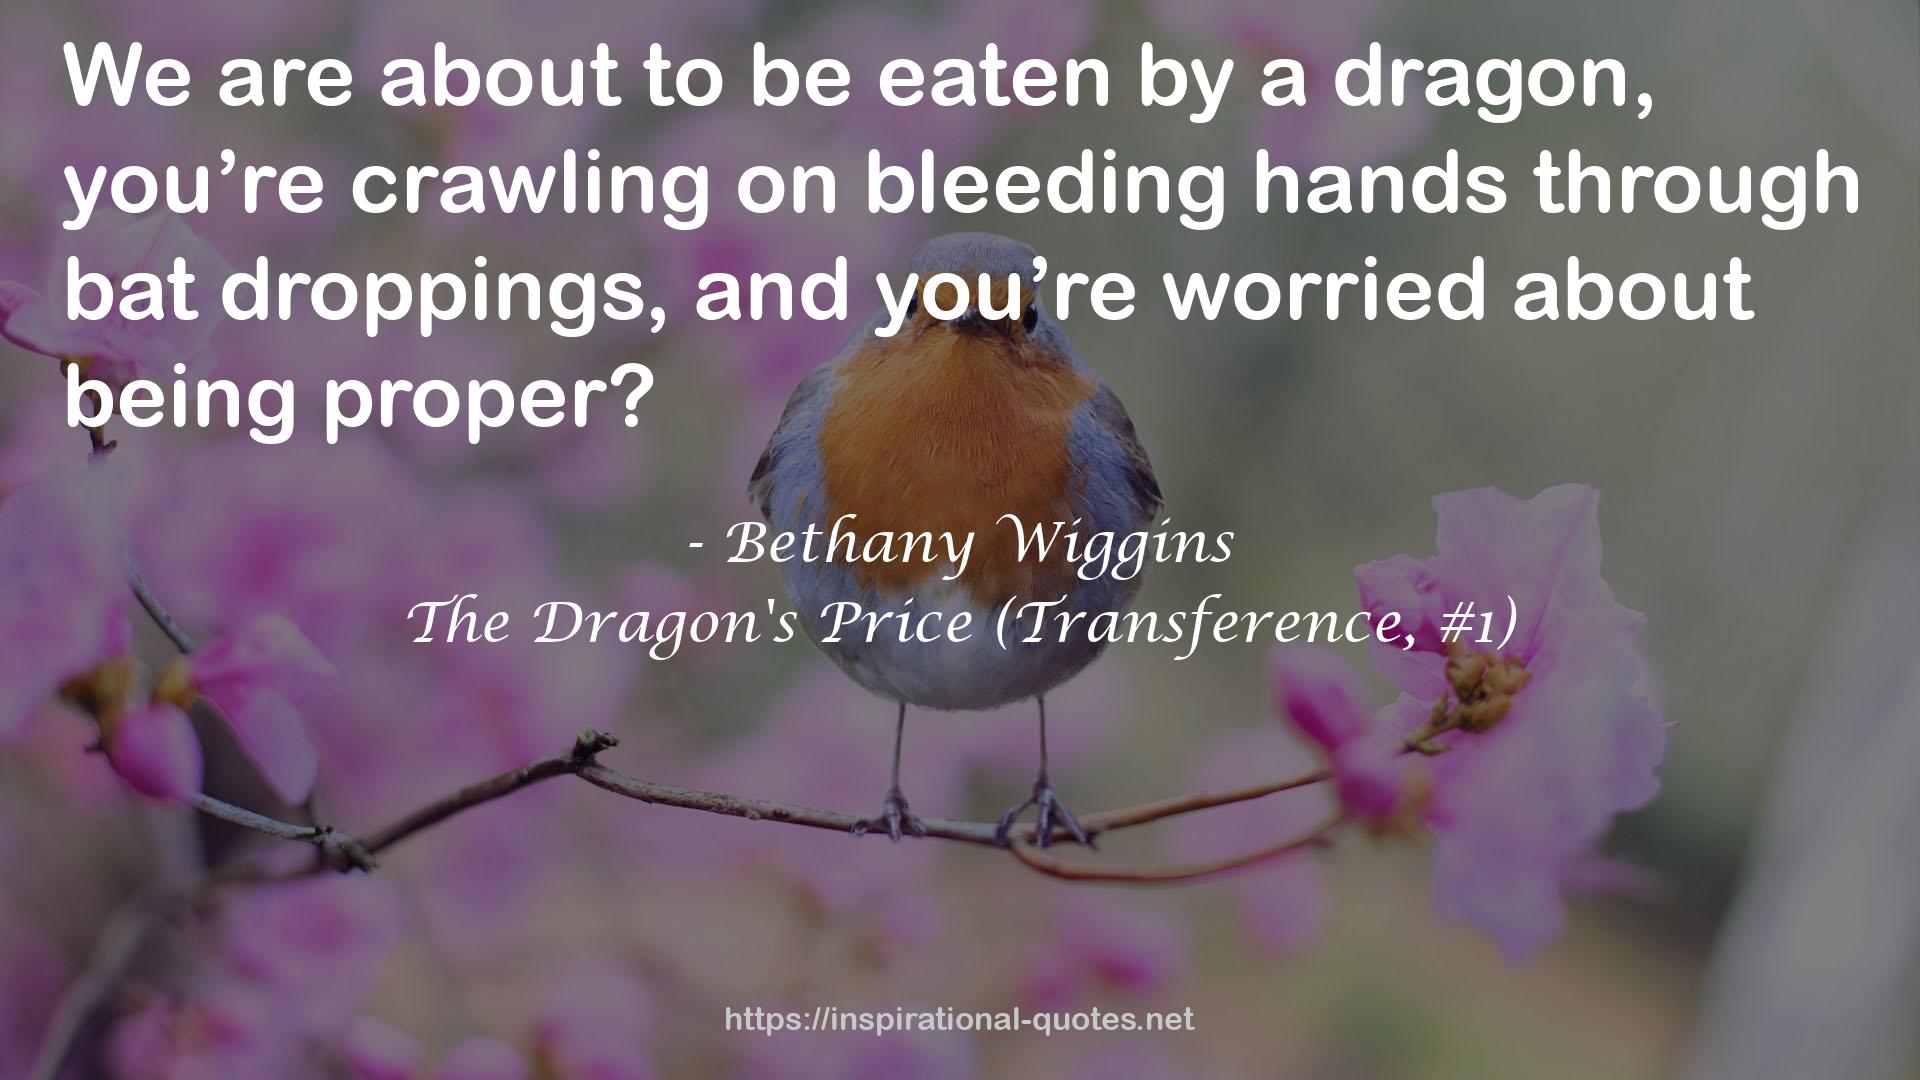 Bethany Wiggins QUOTES